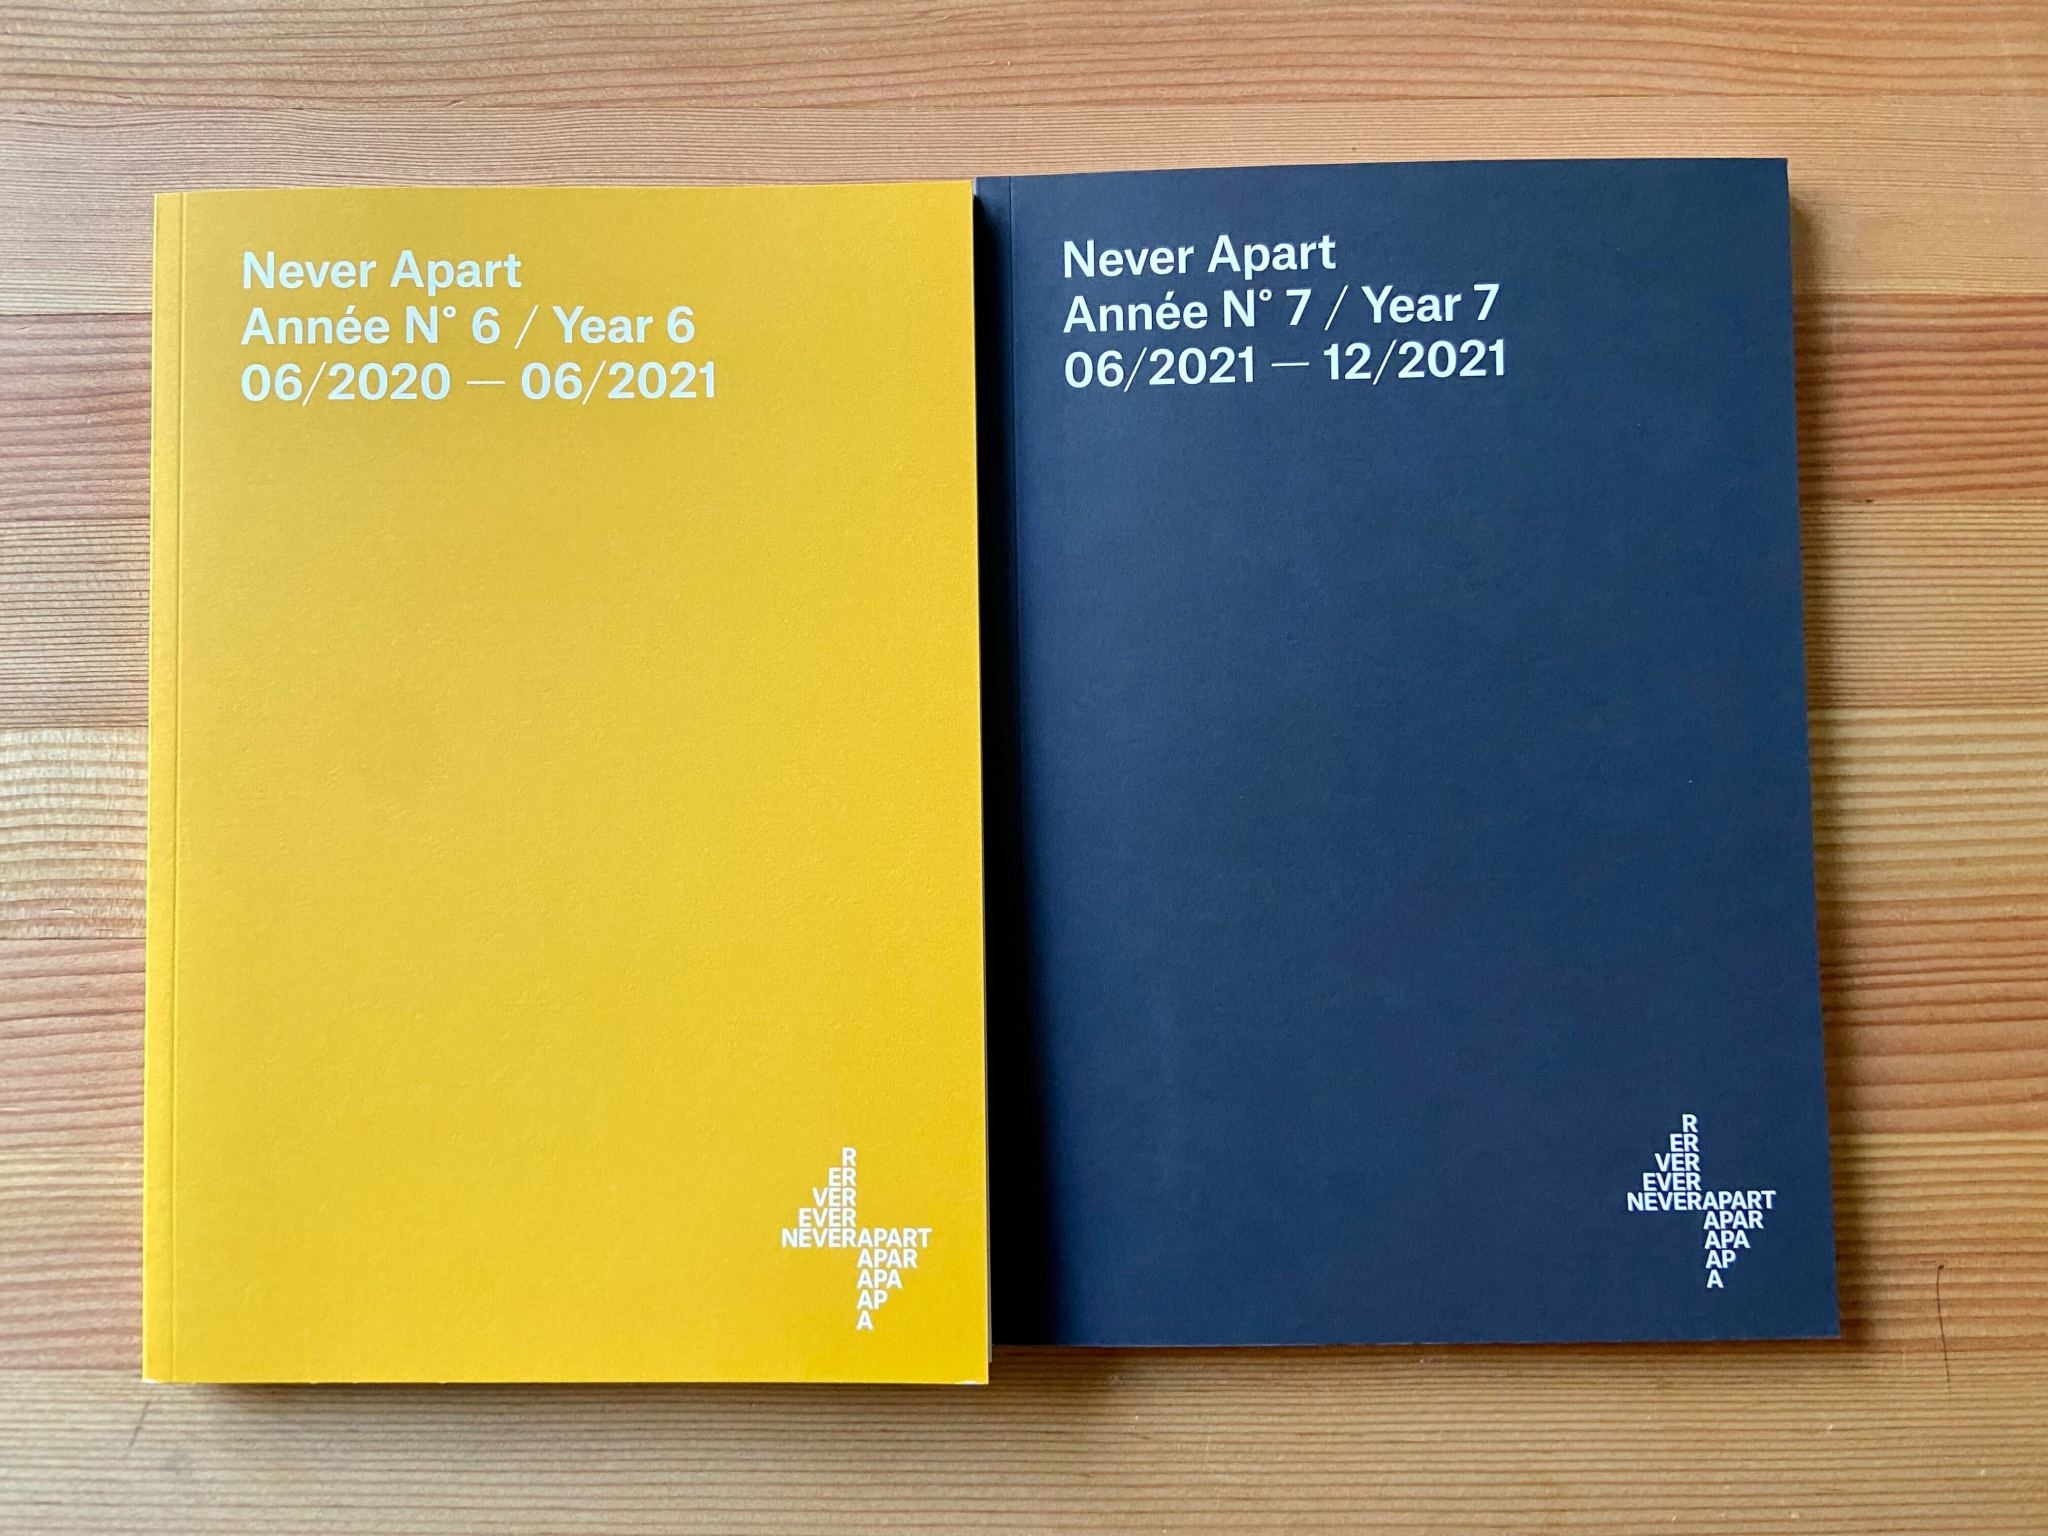 Never Apart Copy of Never Apart Yearbook 2021